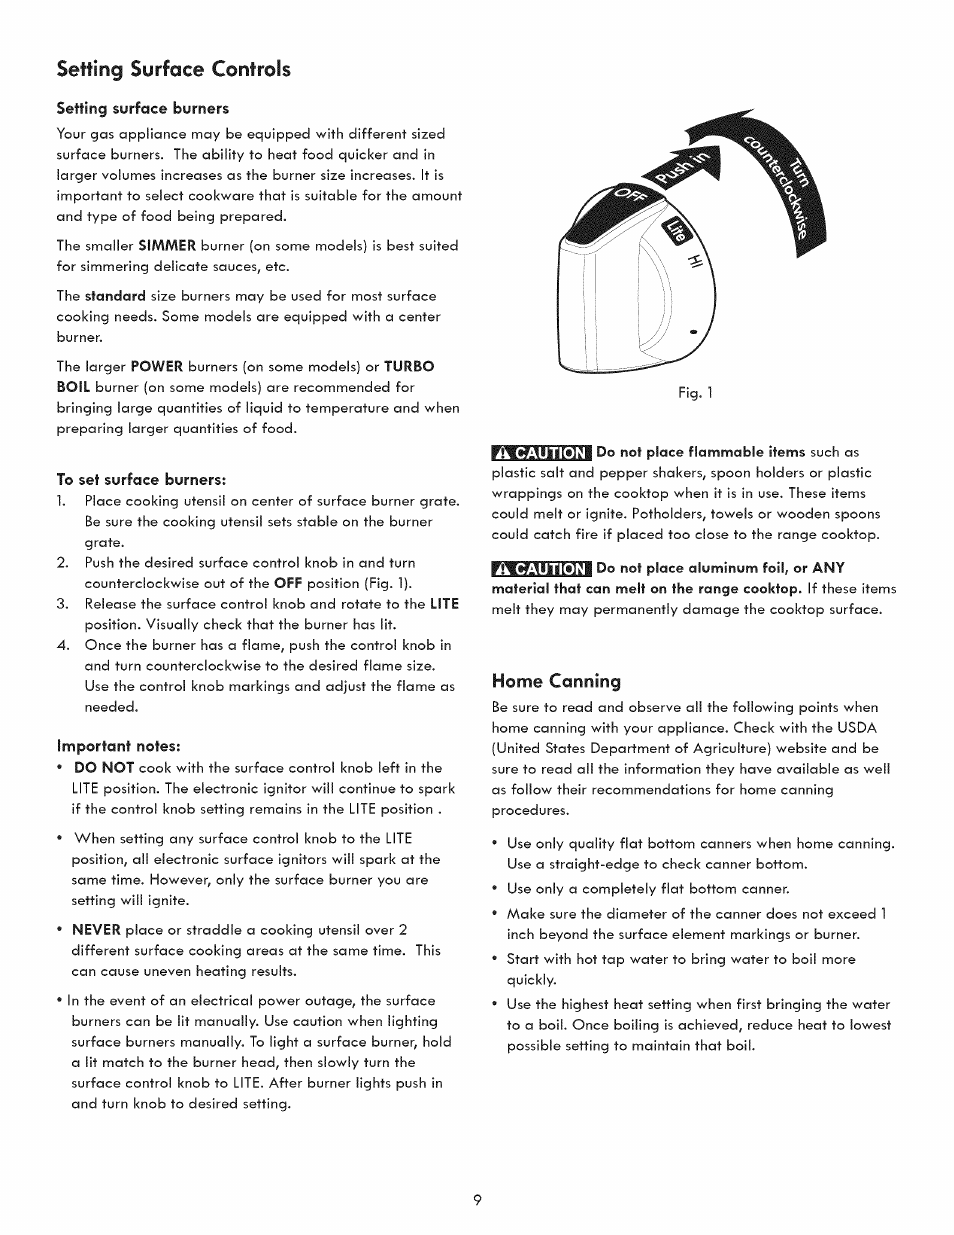 Setting surface burners, To set surface burners, Important notes | Home canning, Setting surface controls | Kenmore 790.7050 User Manual | Page 9 / 22